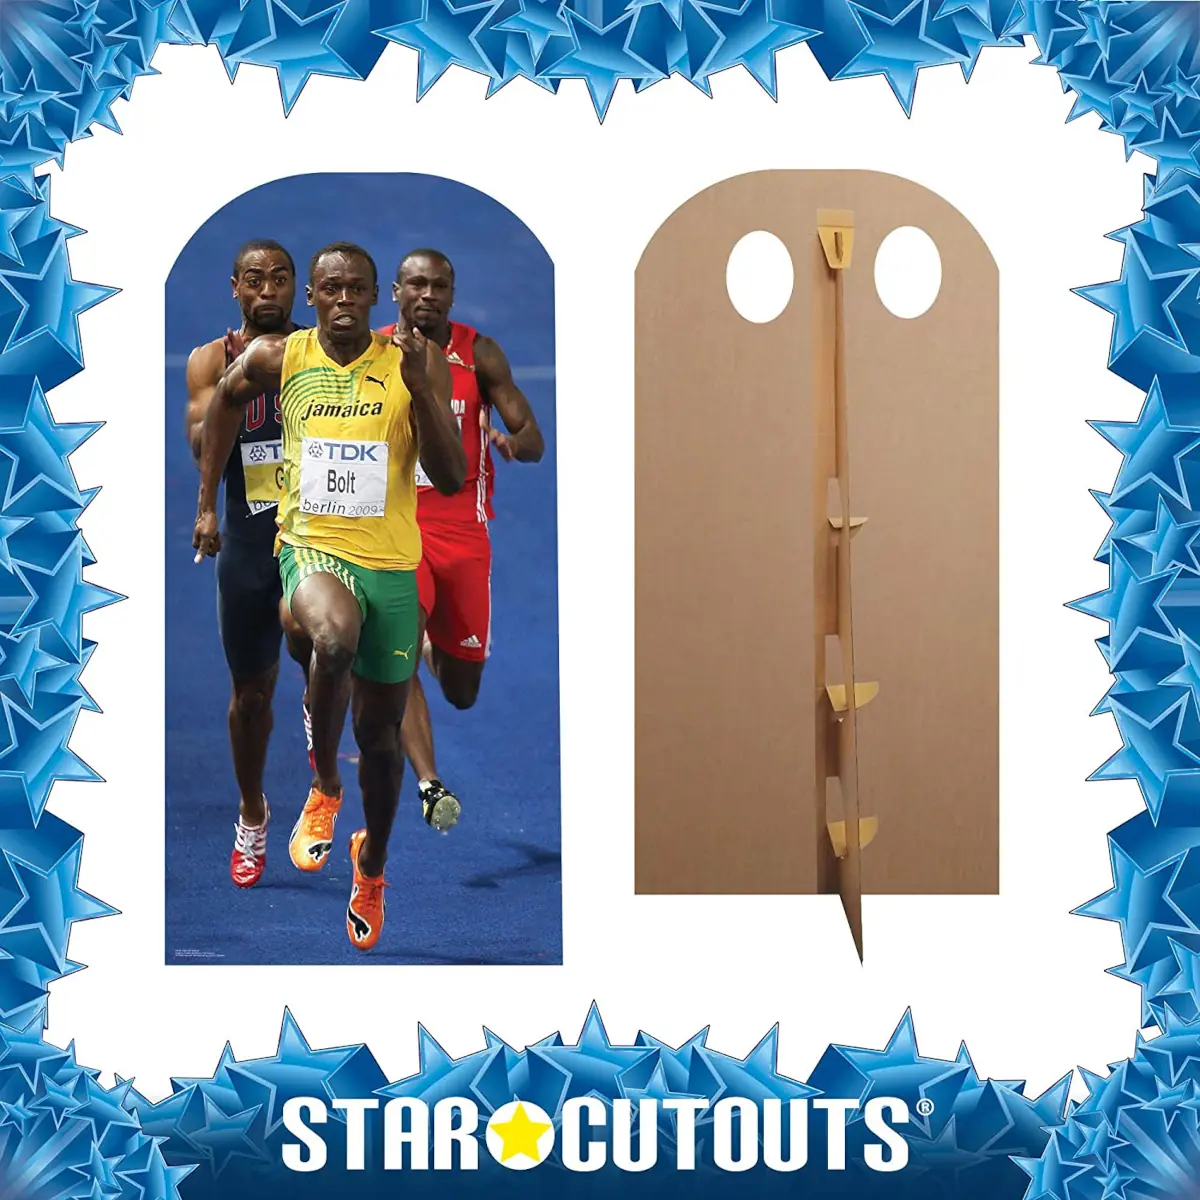 *OLYMPIC PACK* Olympics Podium Stand-in Lifesize Cardboard Cutout / Standee  (Olympic Games) - INCLUDES 8X10 (25X20CM) STAR PHOTO - FAN PACK